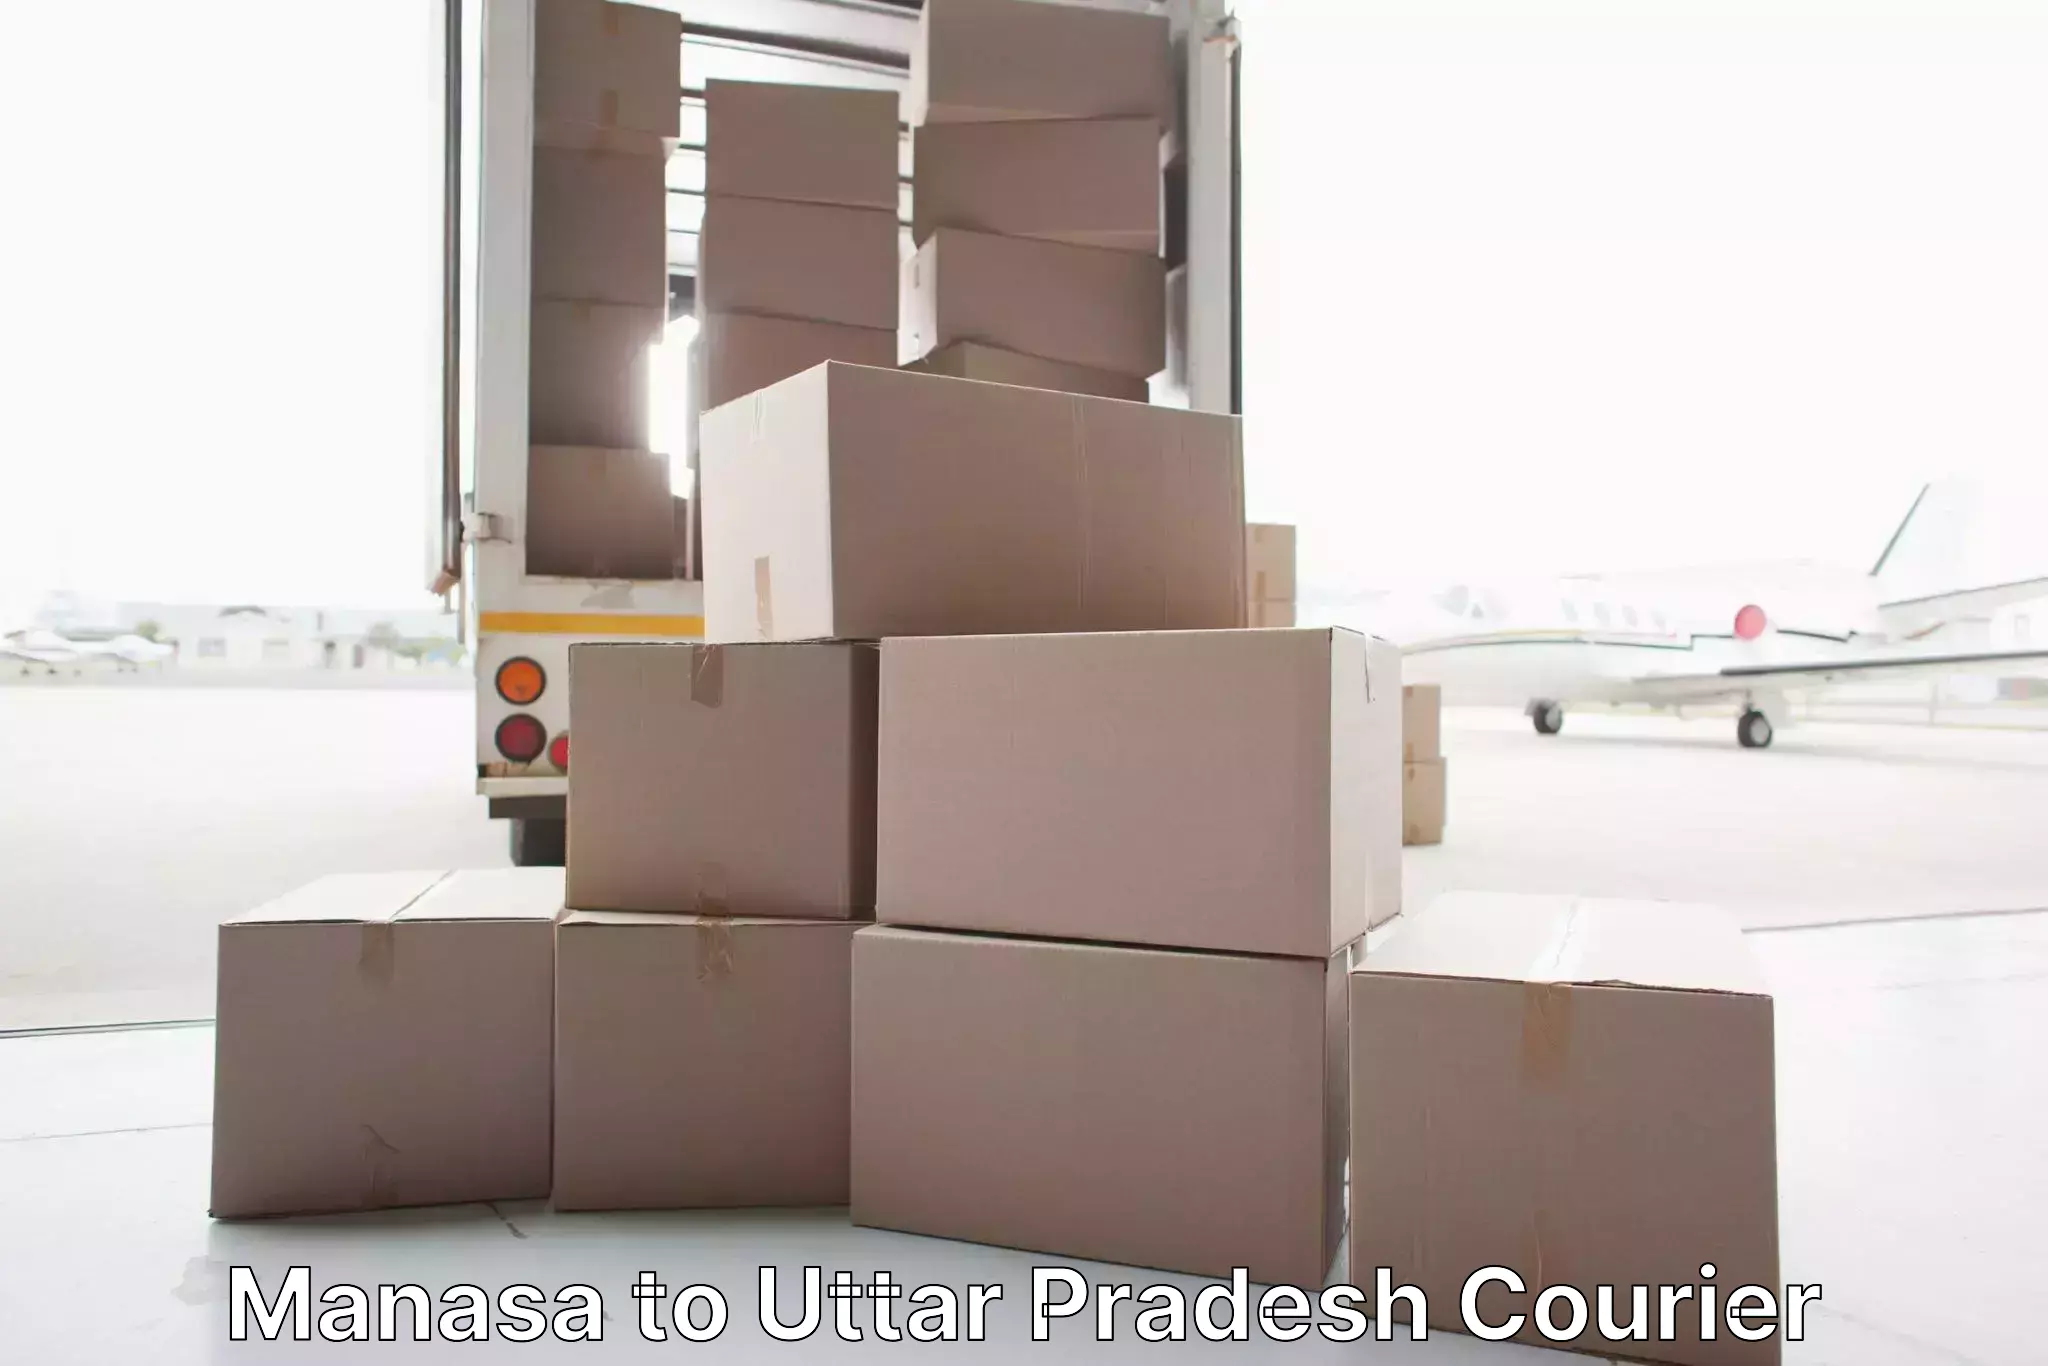 Reliable relocation services in Manasa to Bareilly